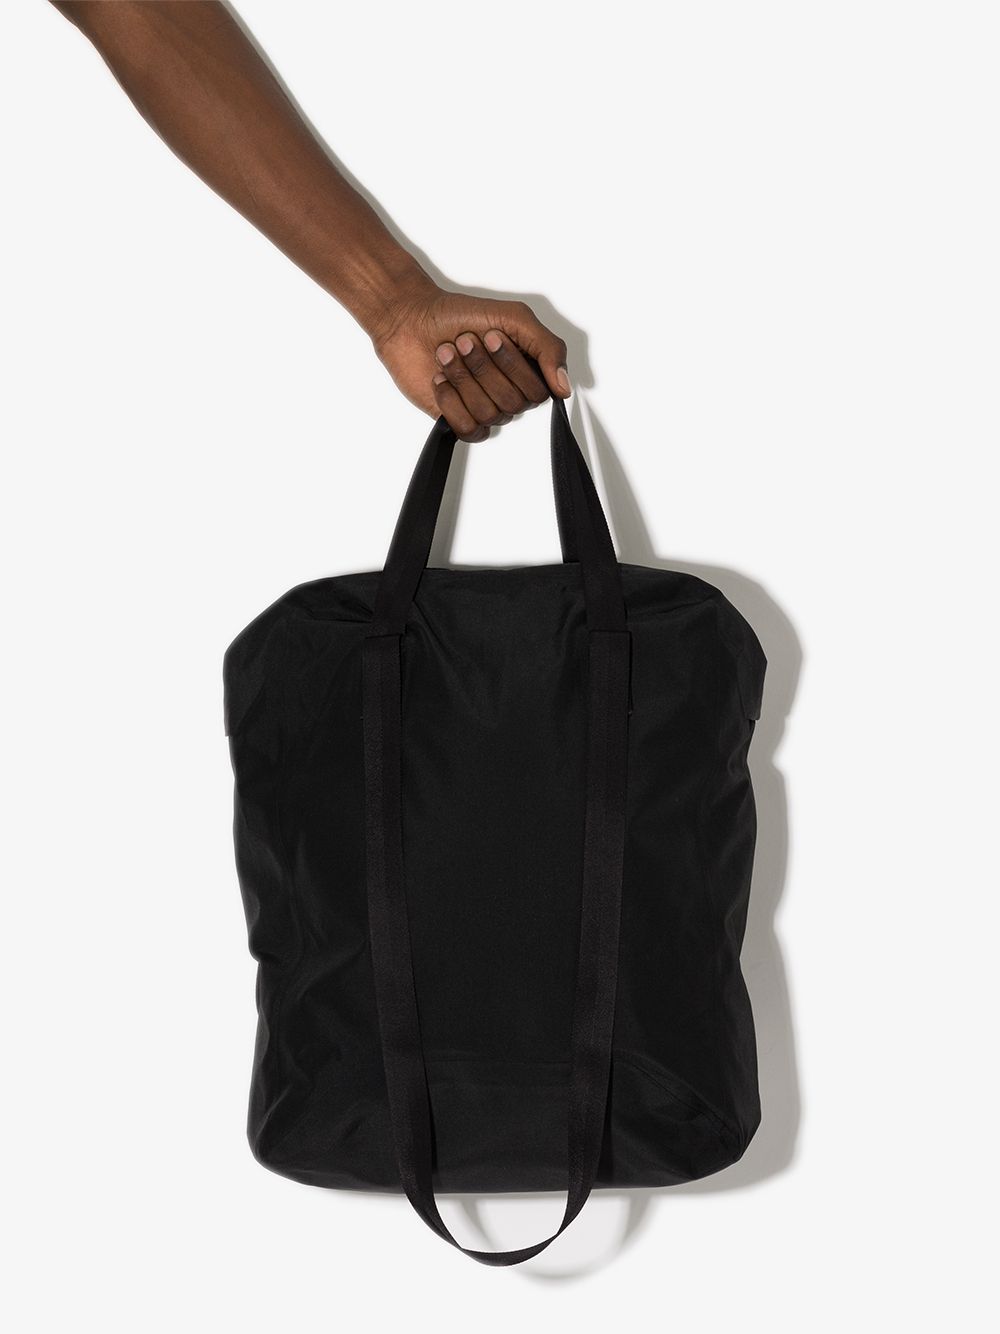 Seque Re-System tote bag, Veilance